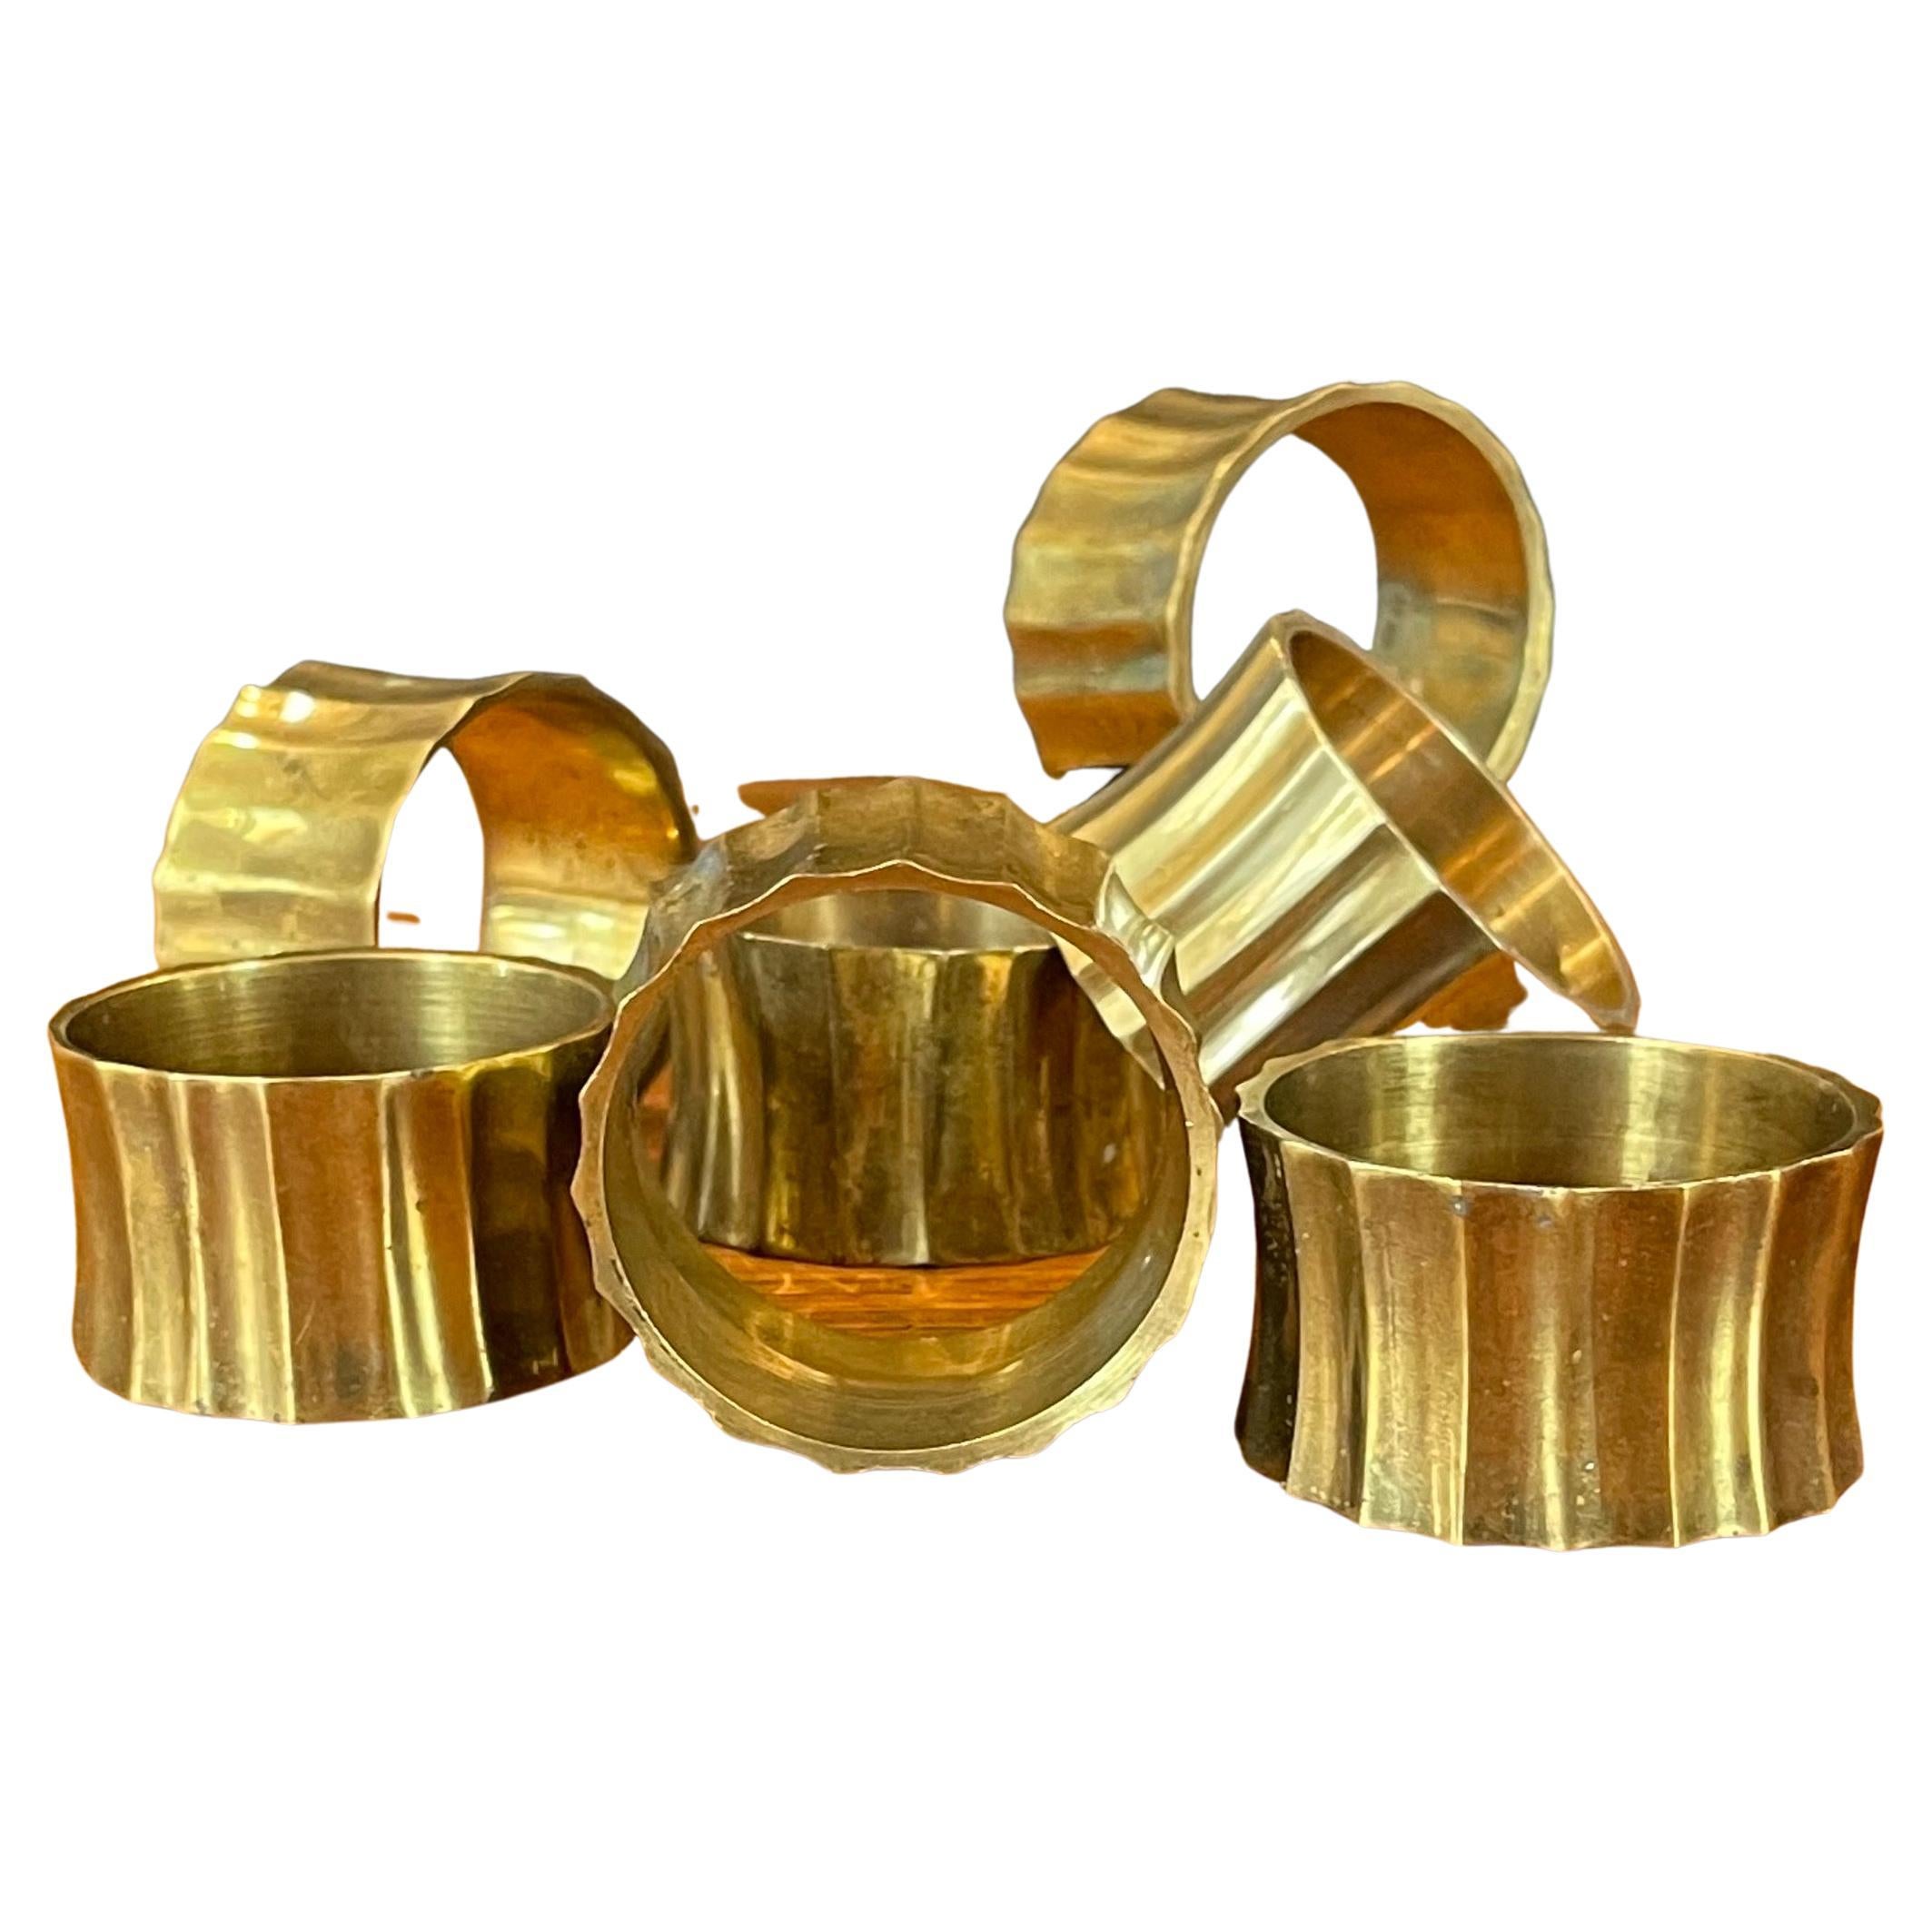 Set of eight MCM brass napkin rings, circa 1970s. The rings have a circular design and measure 1.875